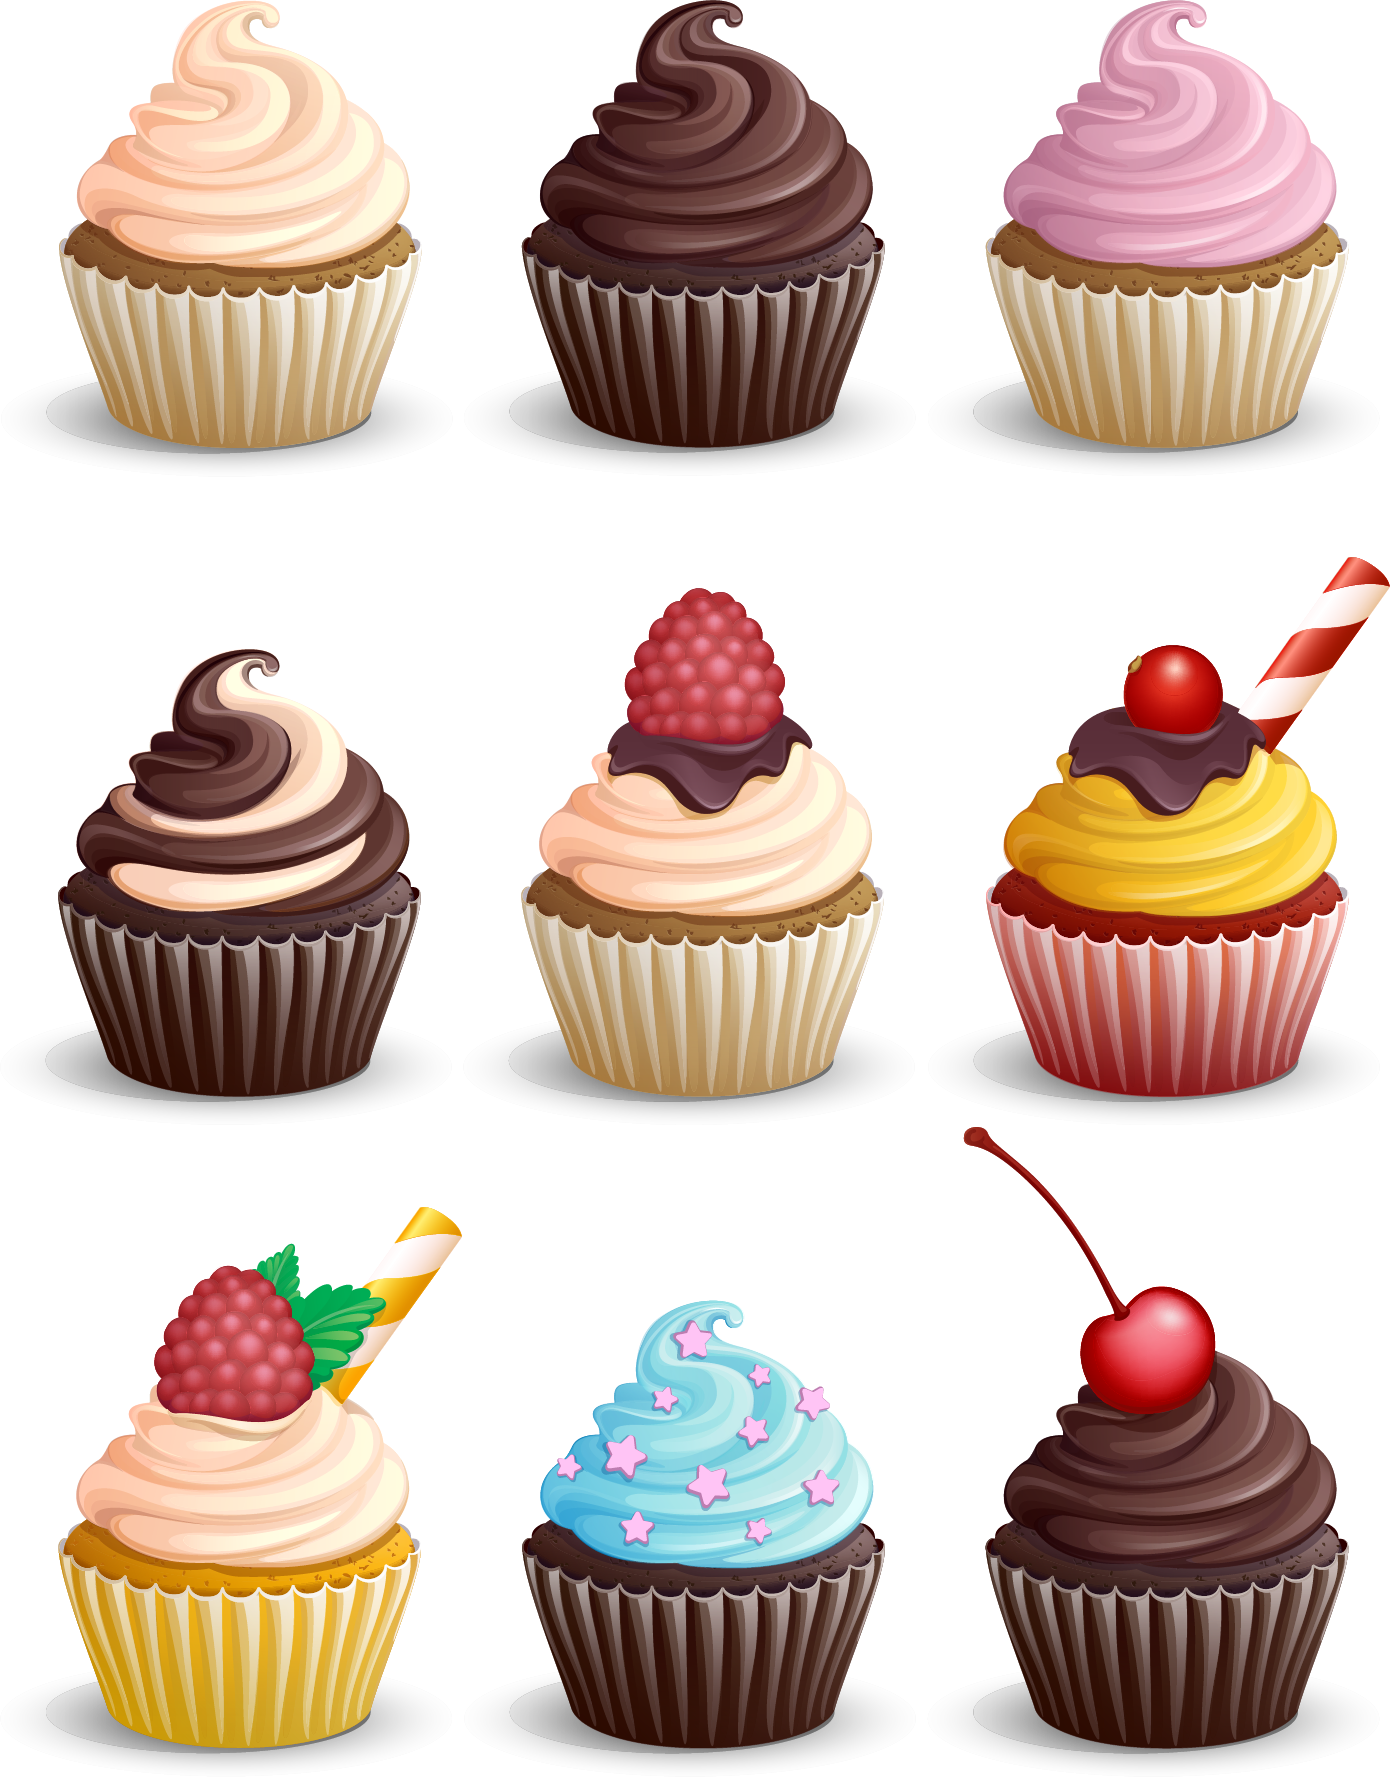 Muffin Chocolate Nine Cupcakes Cupcake Free Download PNG HD Clipart